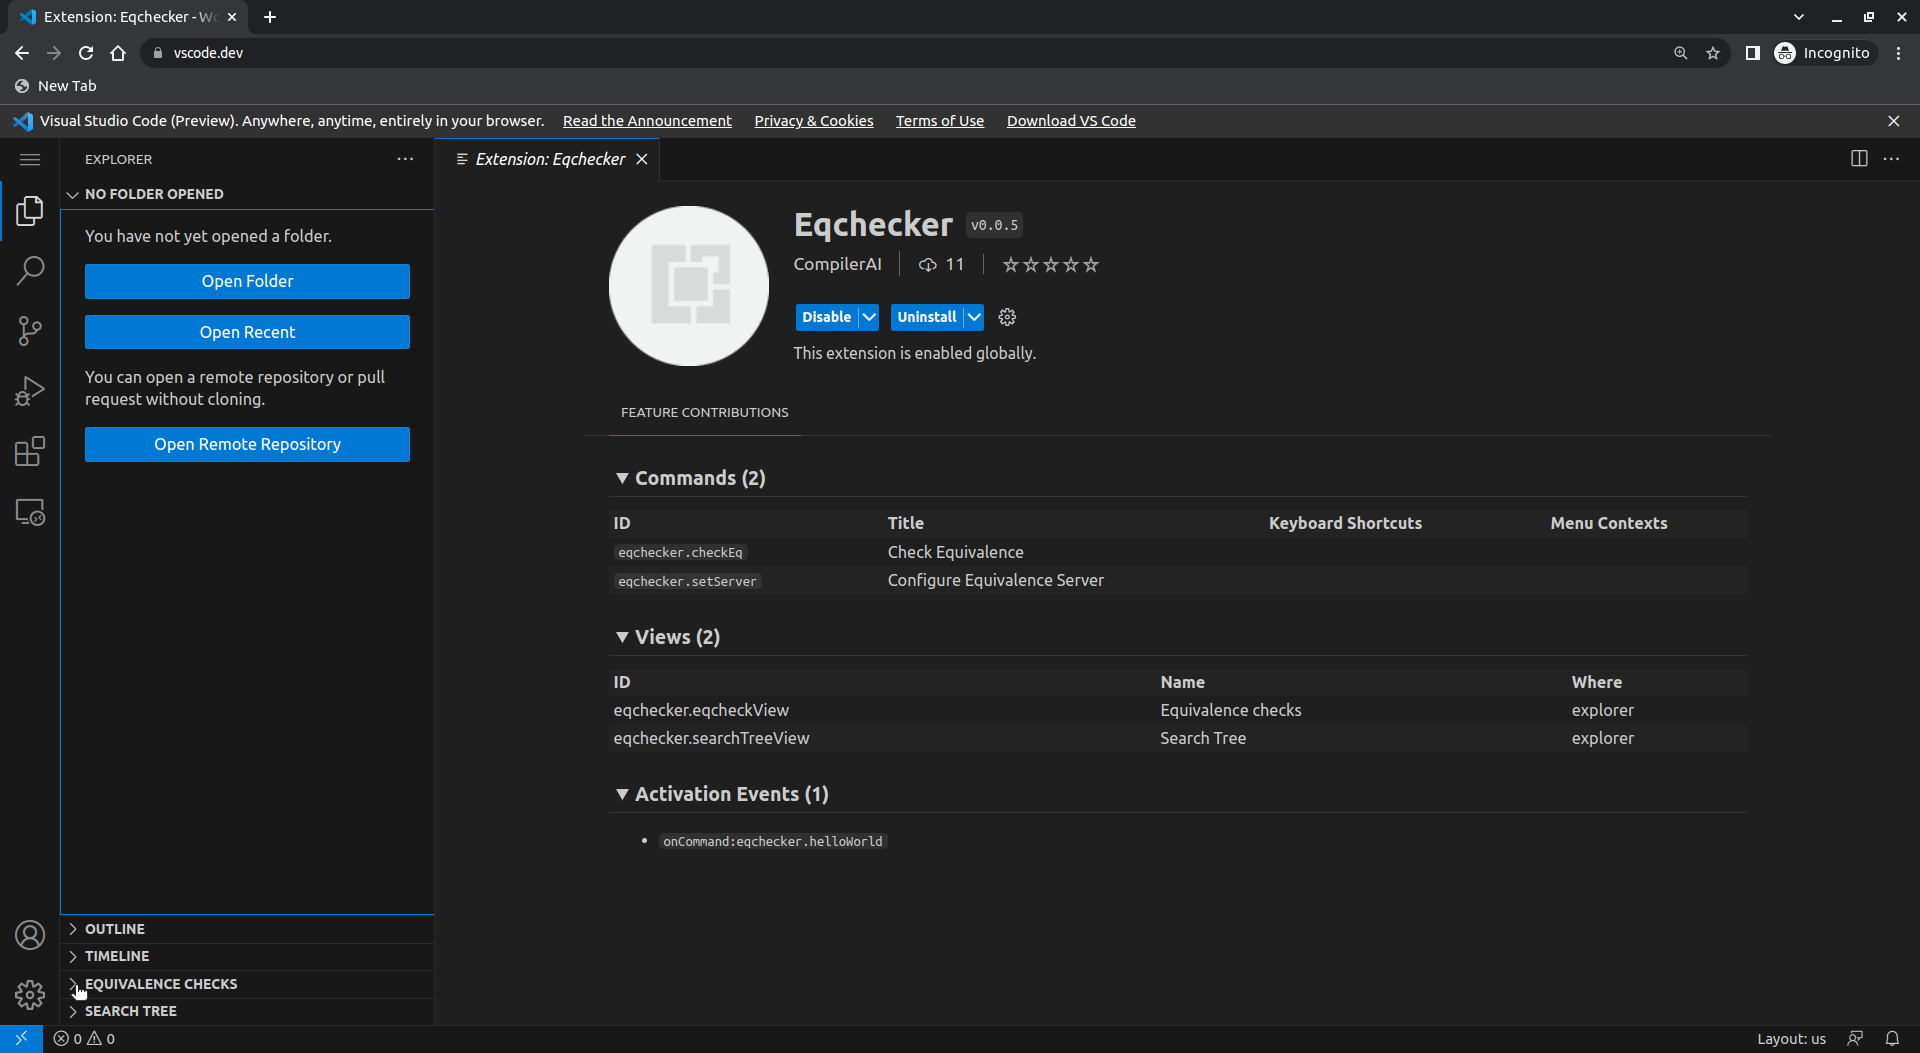 Explorer view. Expand the "Equivalence Checks" and "Search Tree" panes